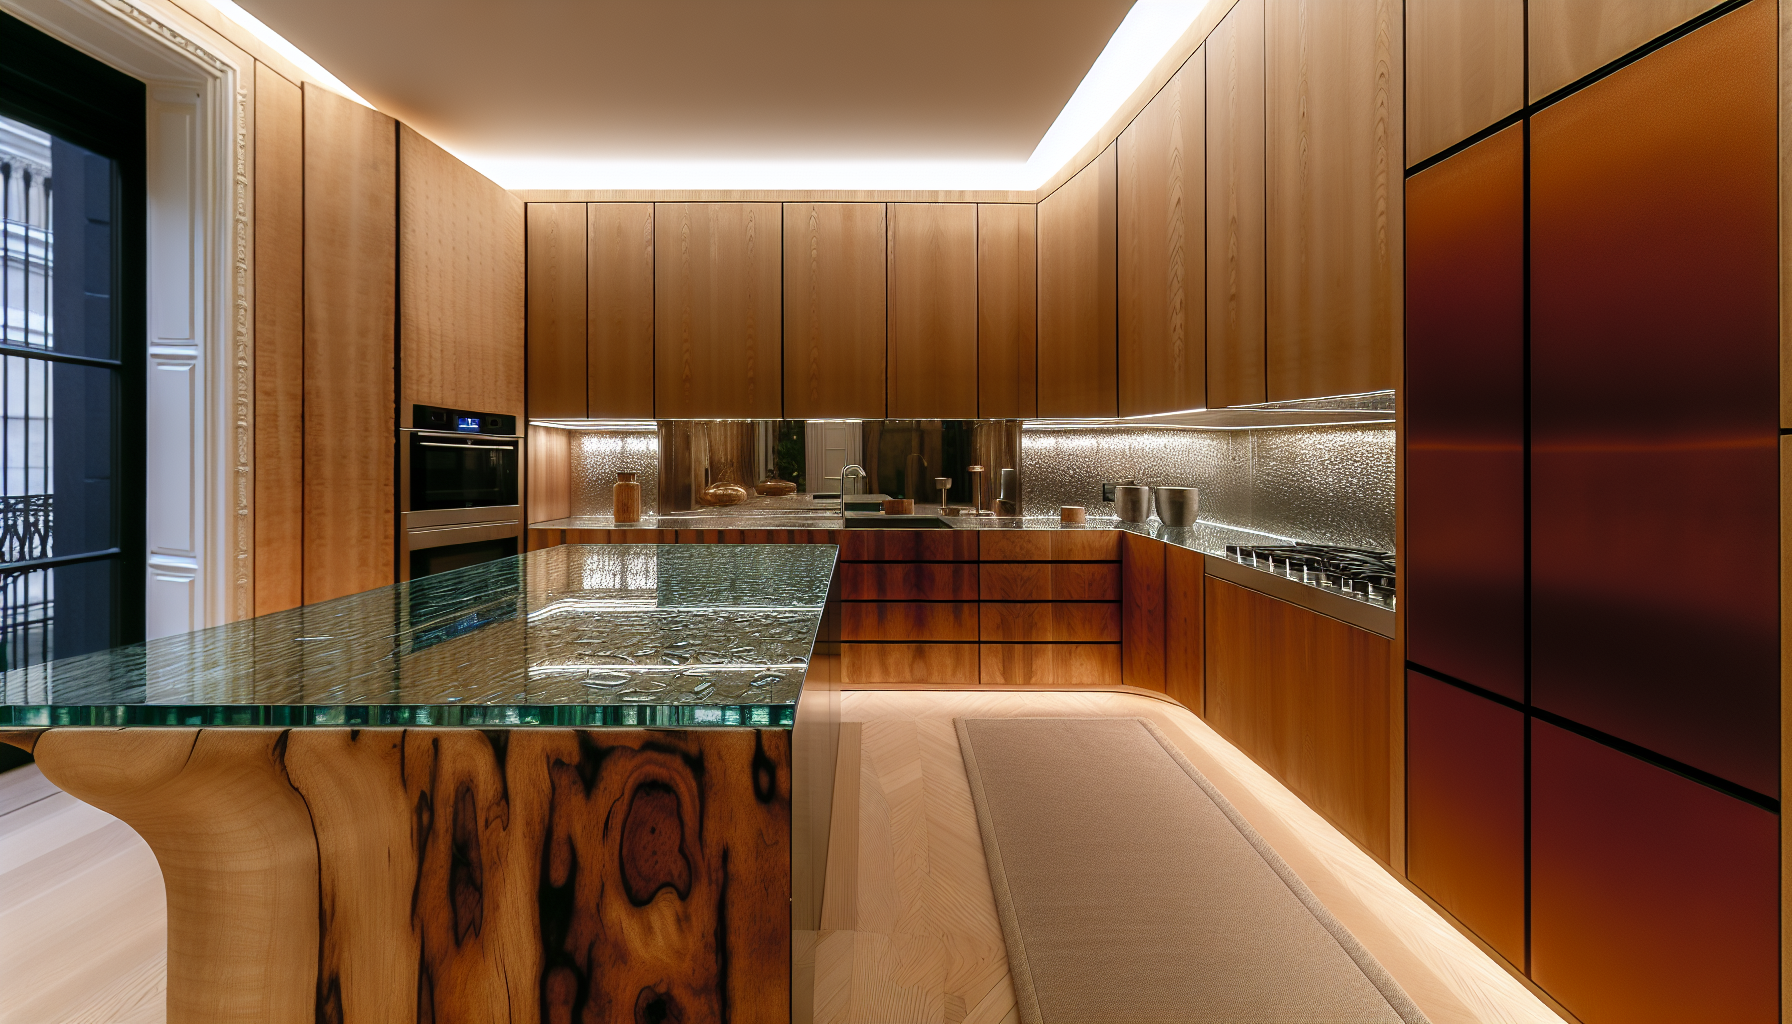 Luxury kitchen with opulent and sustainable materials